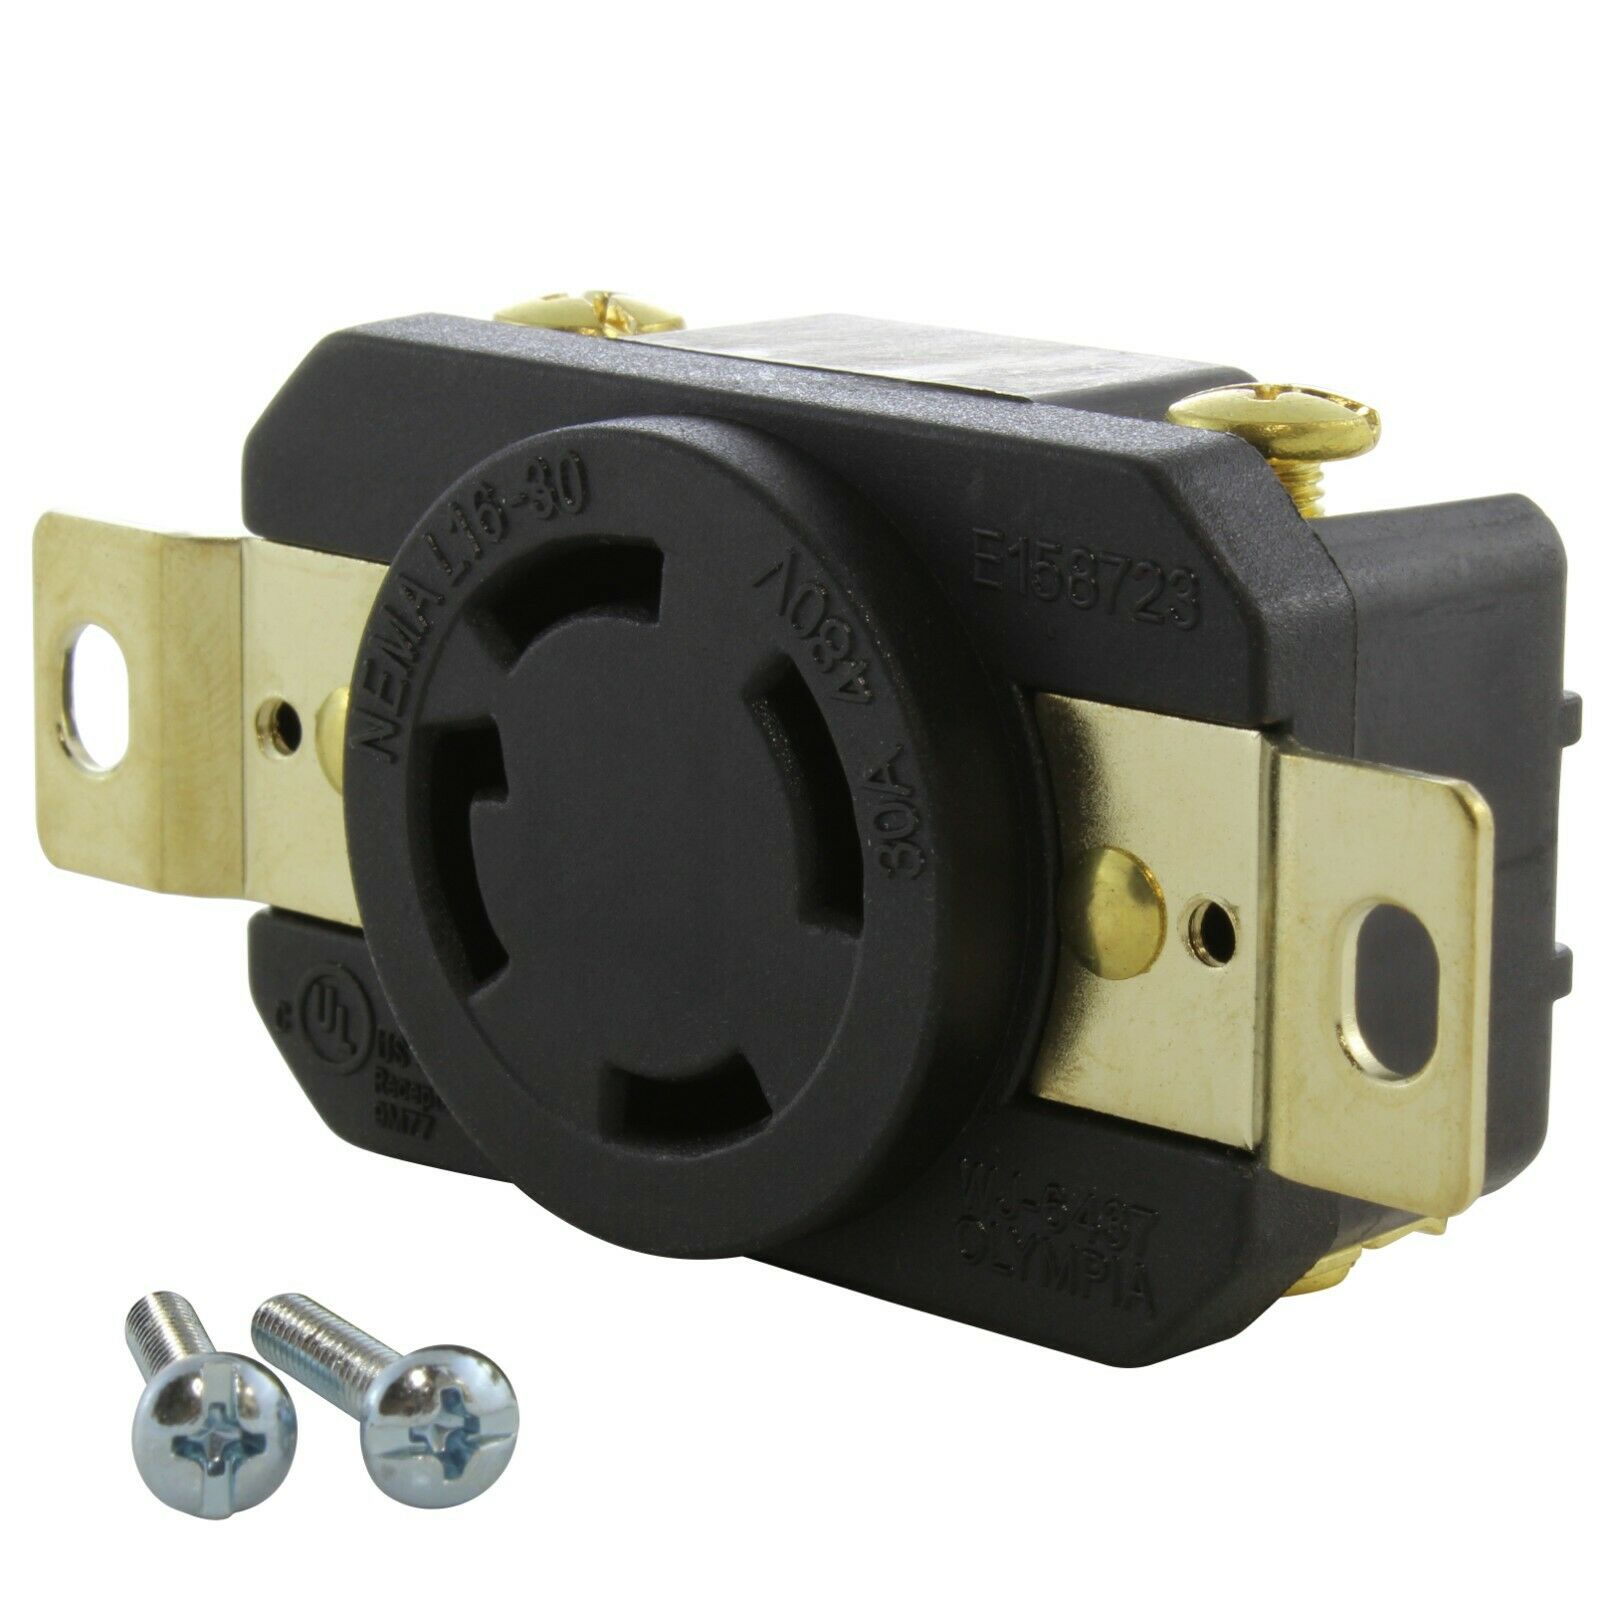 30 Amp 3-phase 480 Volt Nema L16-30r Diy Replacement Outlet By Ac Works®